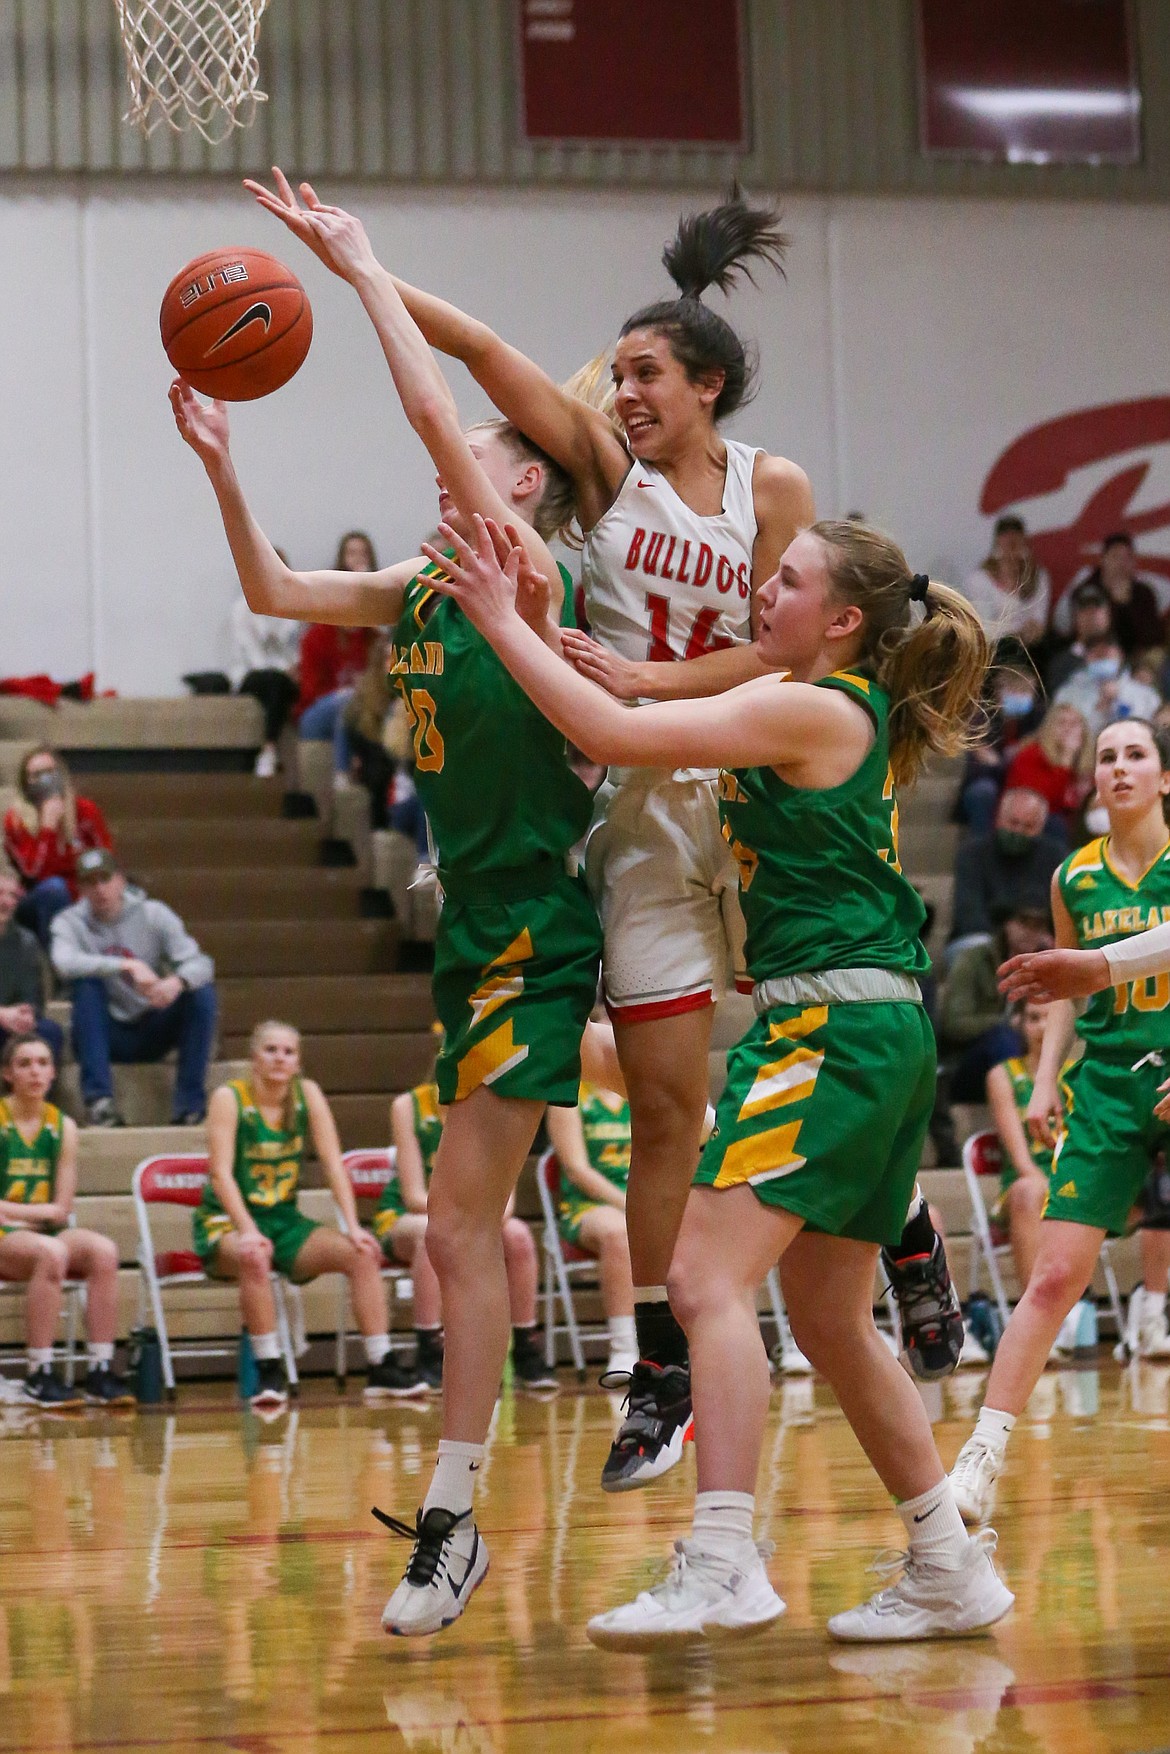 Senior Bella Phillips battles for a rebound with a pair of Lakeland players on Friday at Les Rogers Court.